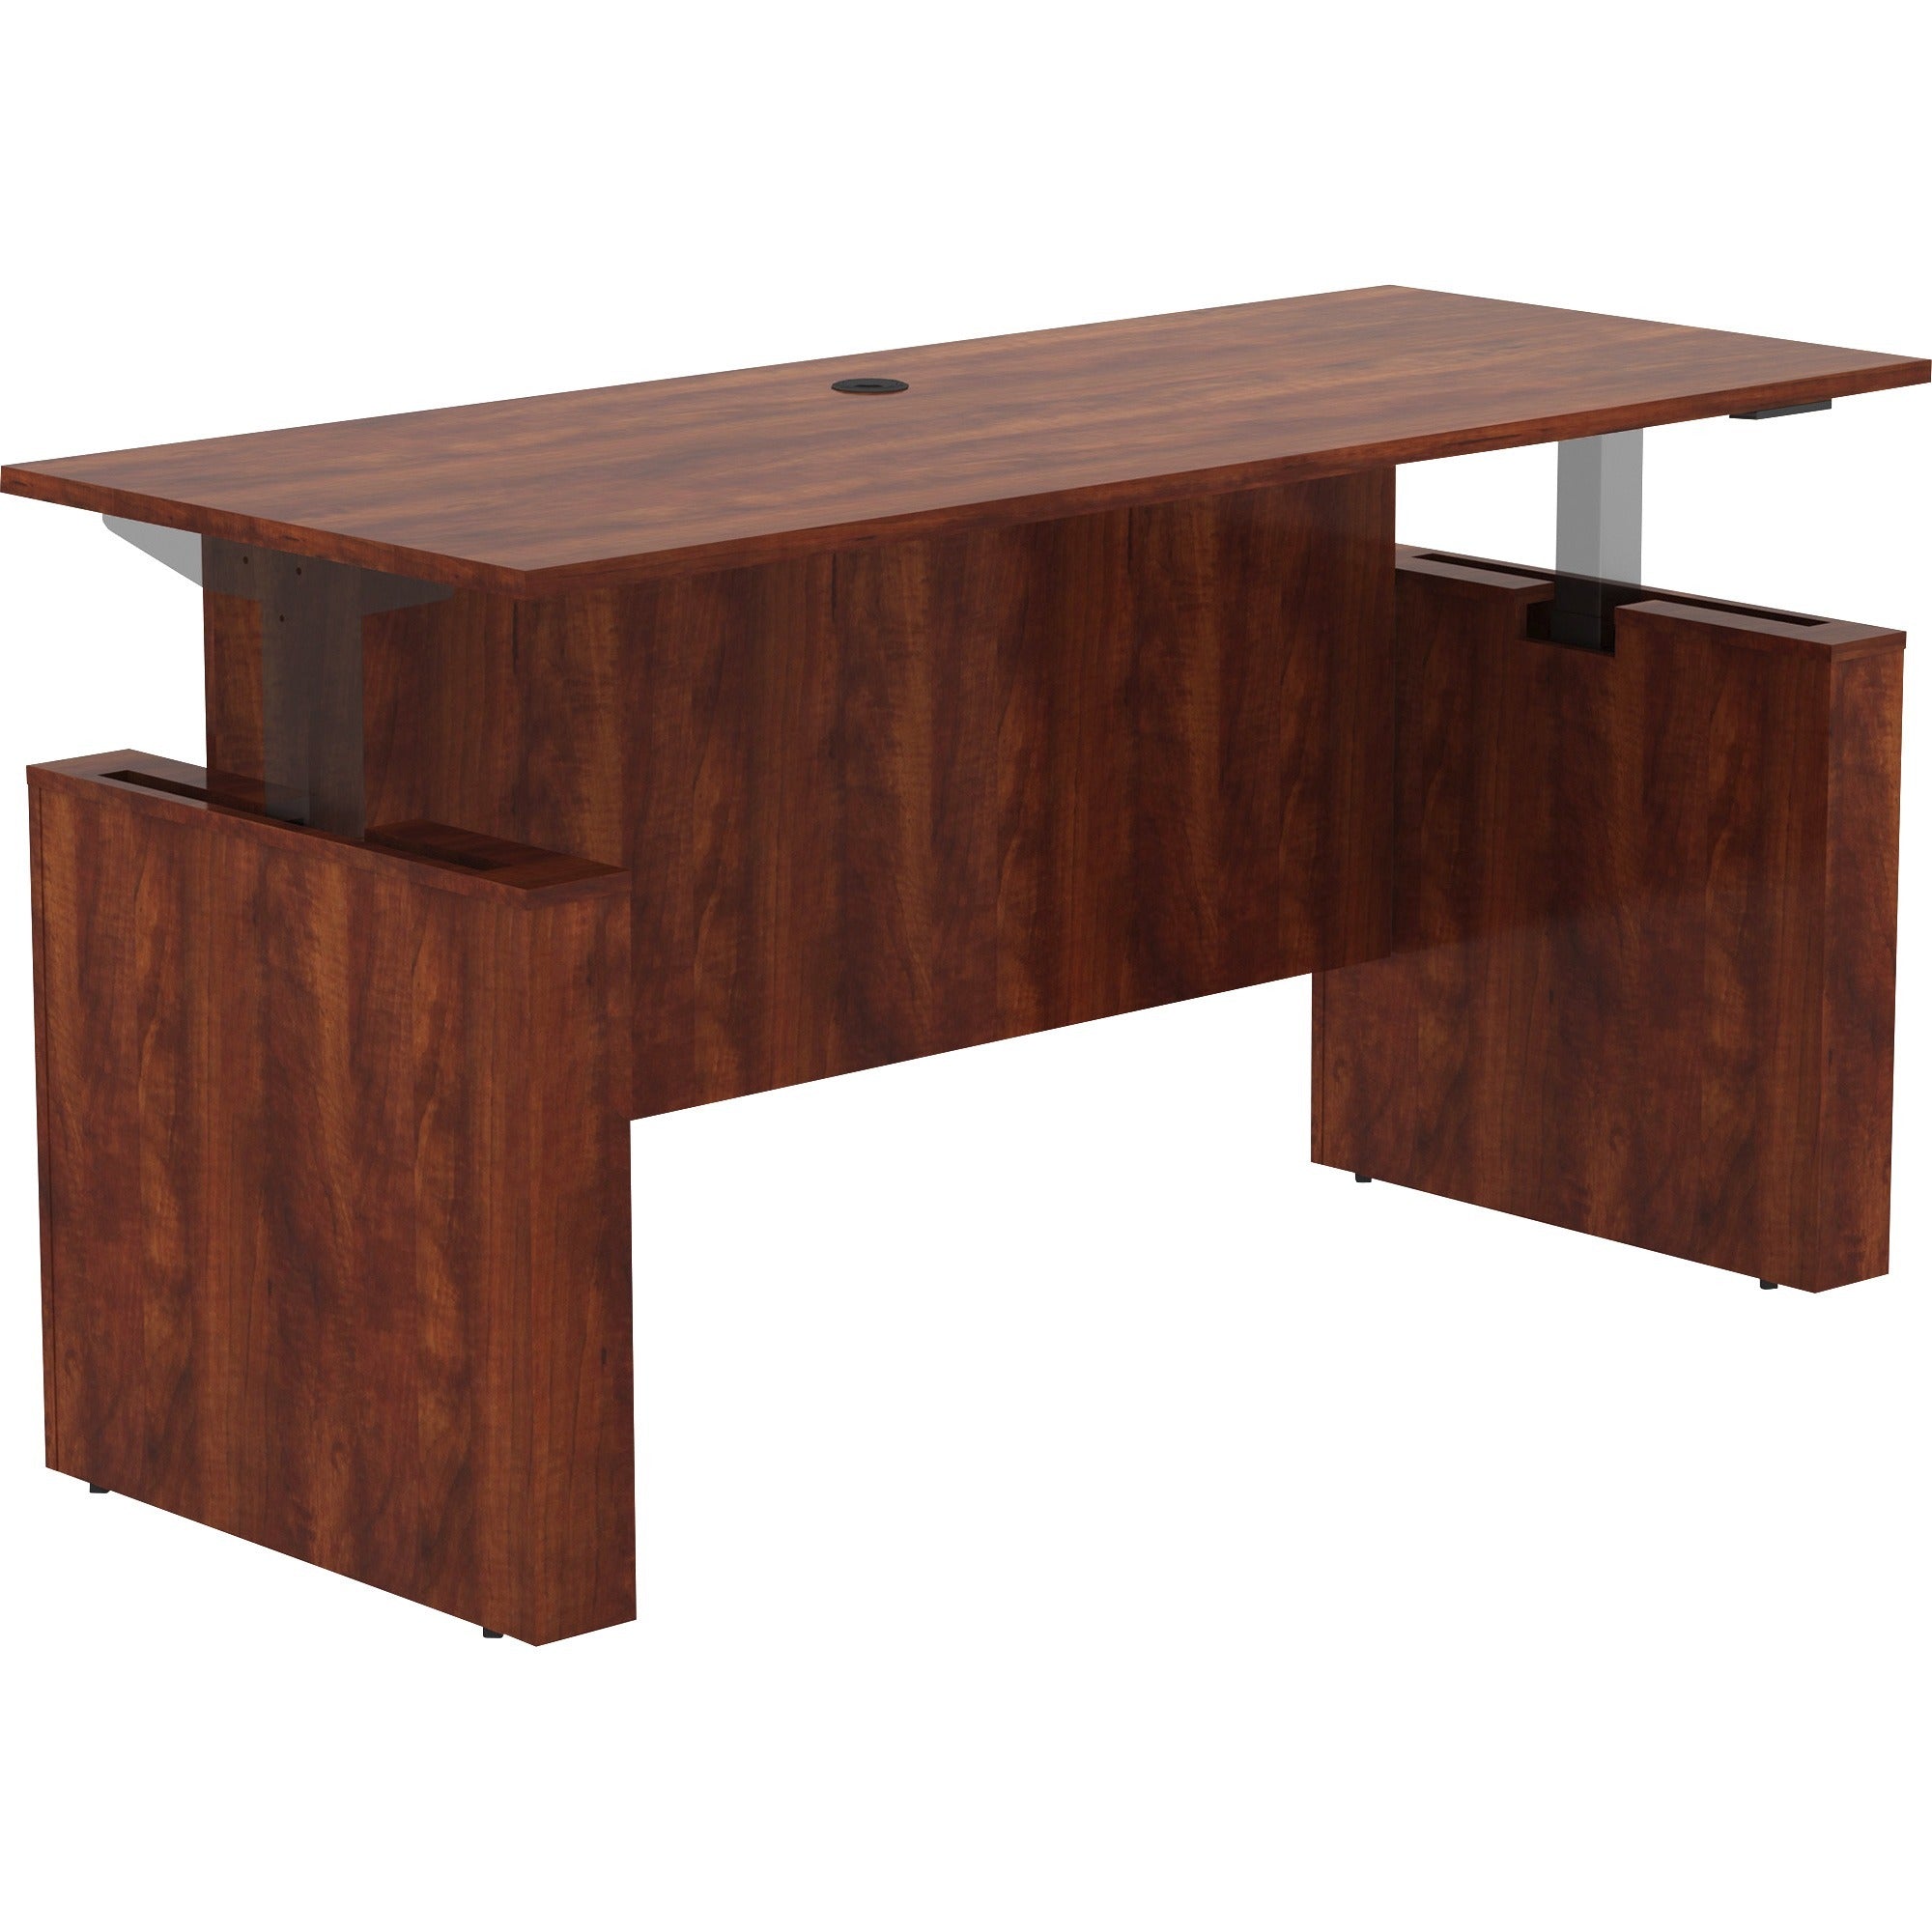 lorell-essentials-series-sit-to-stand-desk-shell-01-top-1-edge-72-x-2949-finish-cherry-laminate-table-top_llr69573 - 1